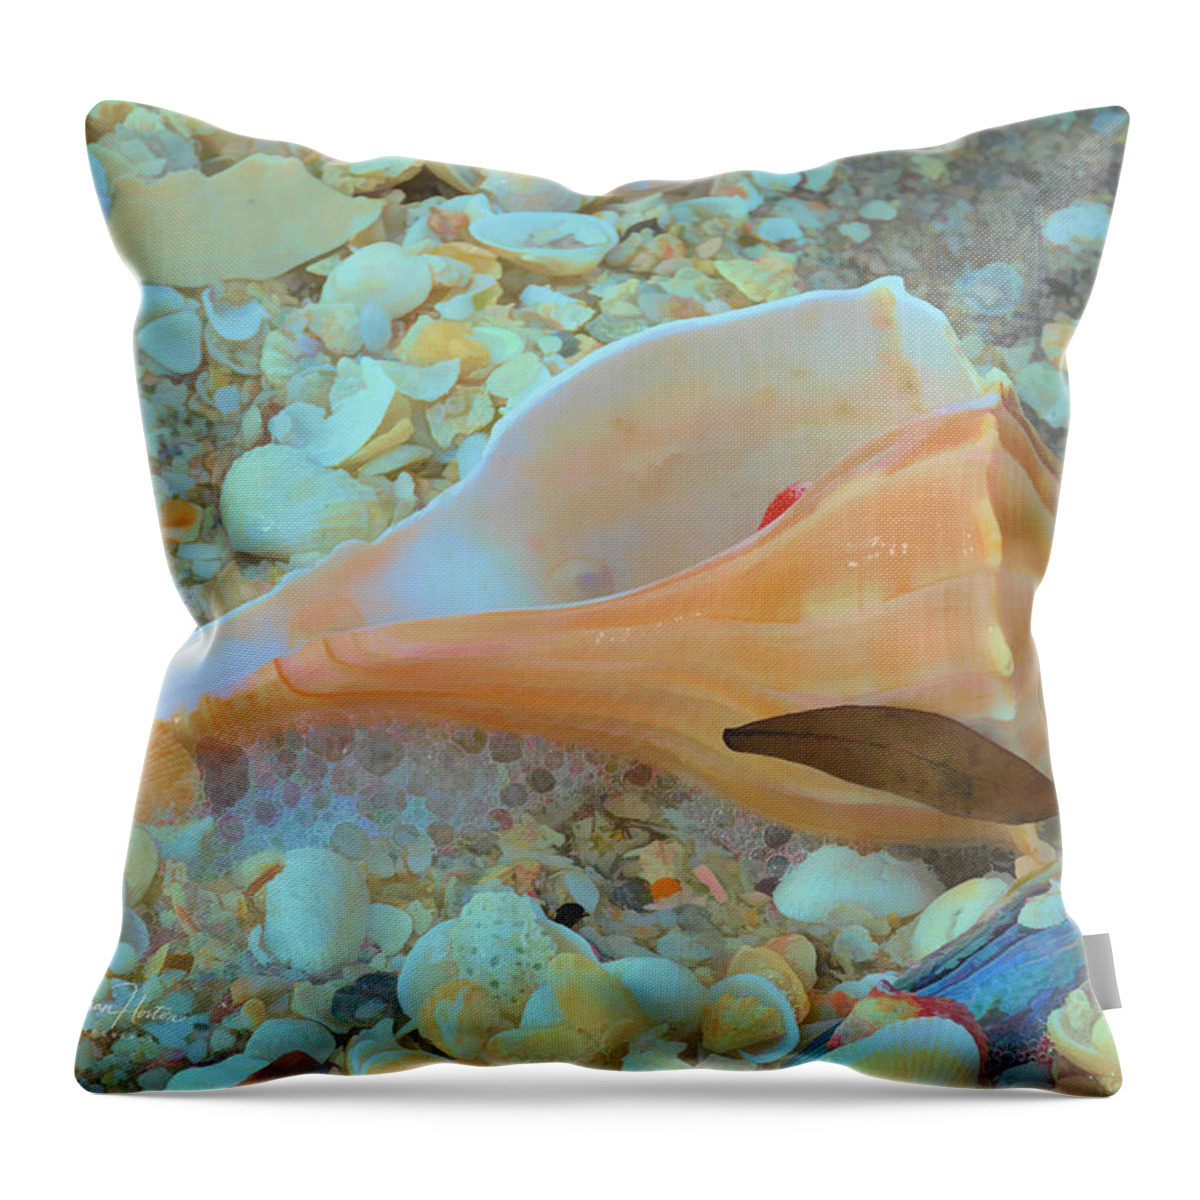 Conch Shell Throw Pillow featuring the photograph Underwater by Alison Belsan Horton